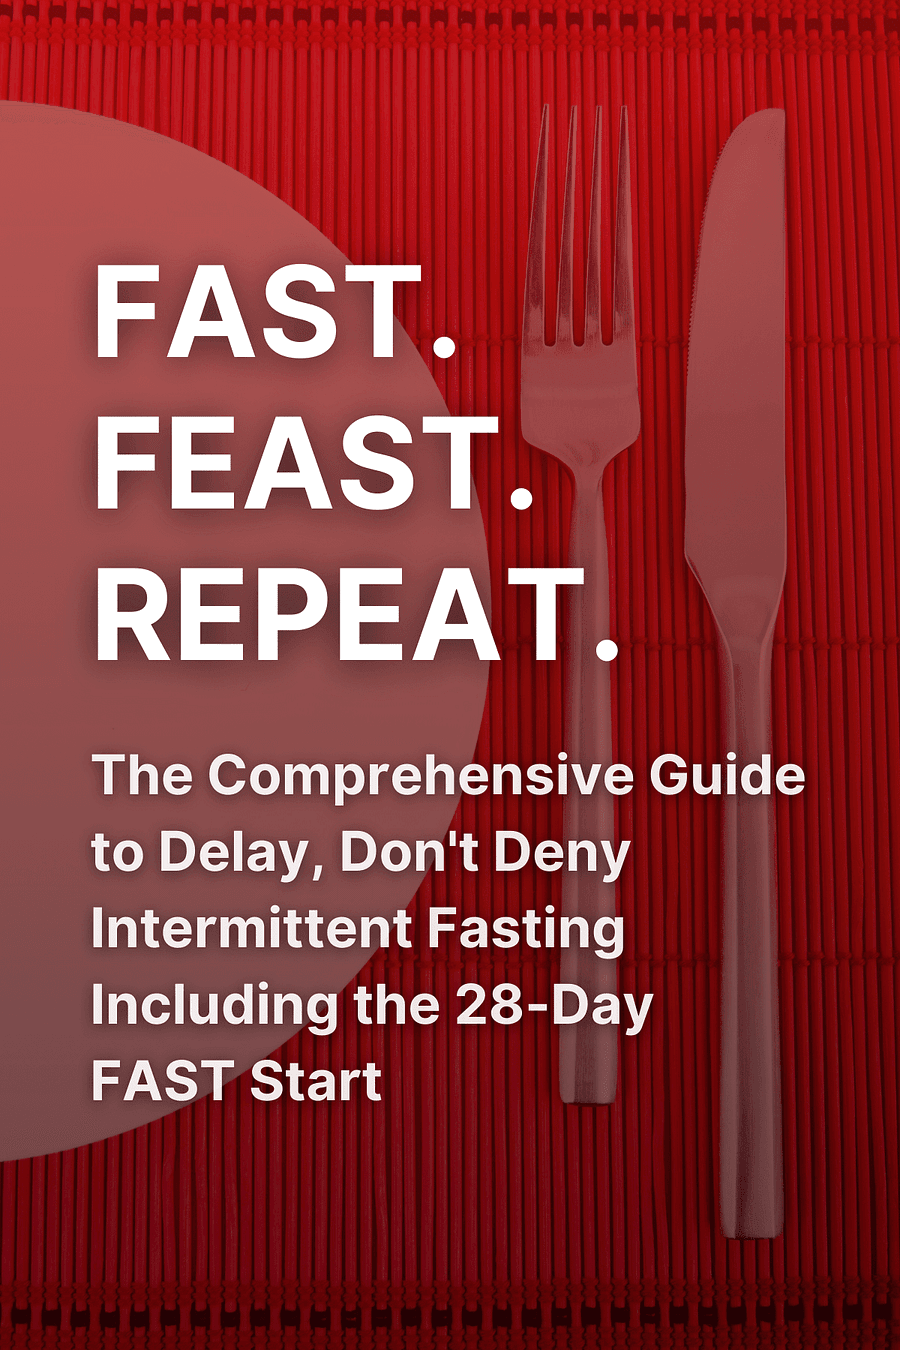 Fast. Feast. Repeat. by Gin Stephens - Book Summary